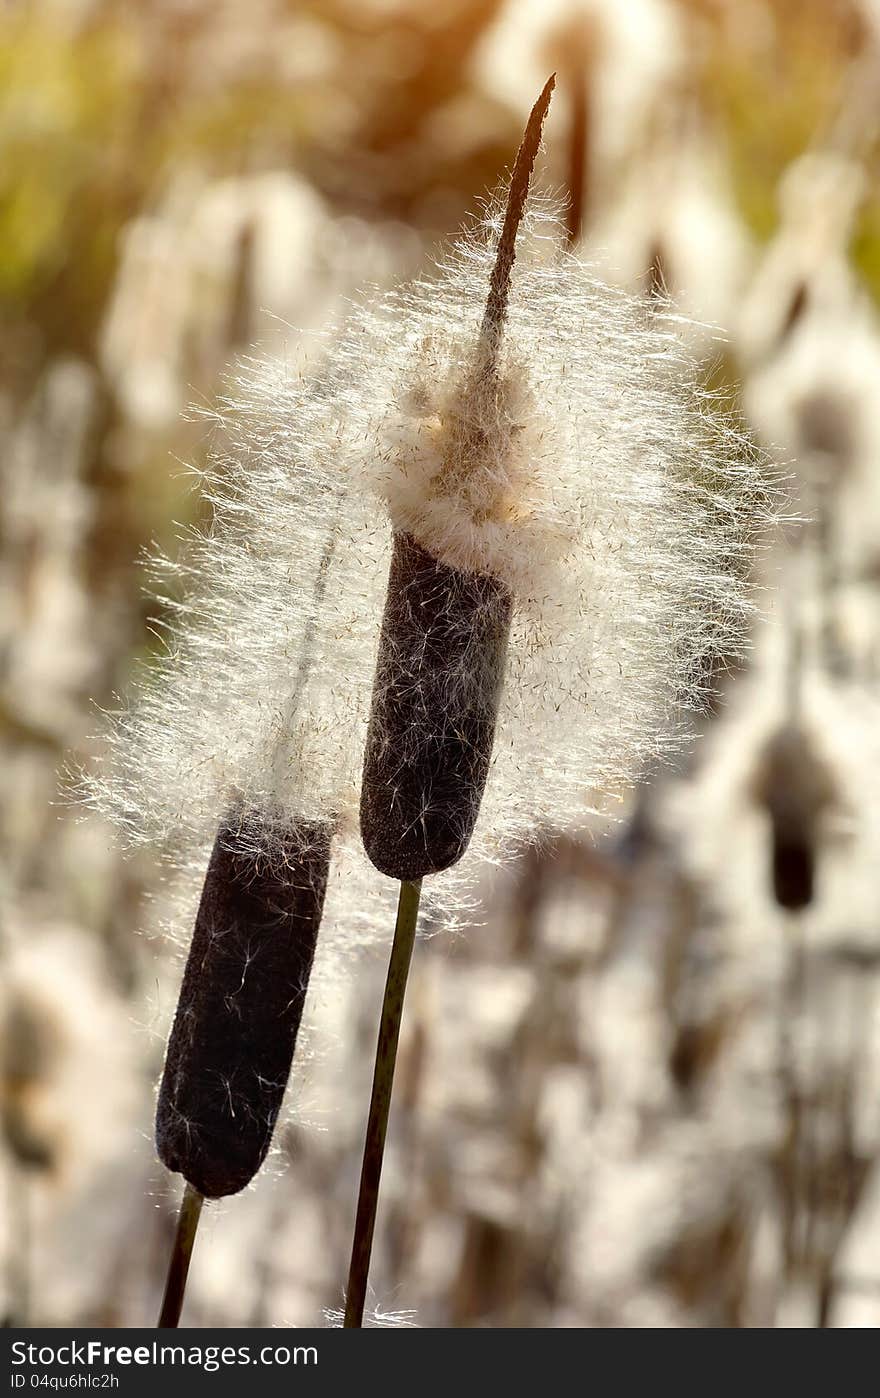 Dry cattails in the sunlight. Dry cattails in the sunlight.